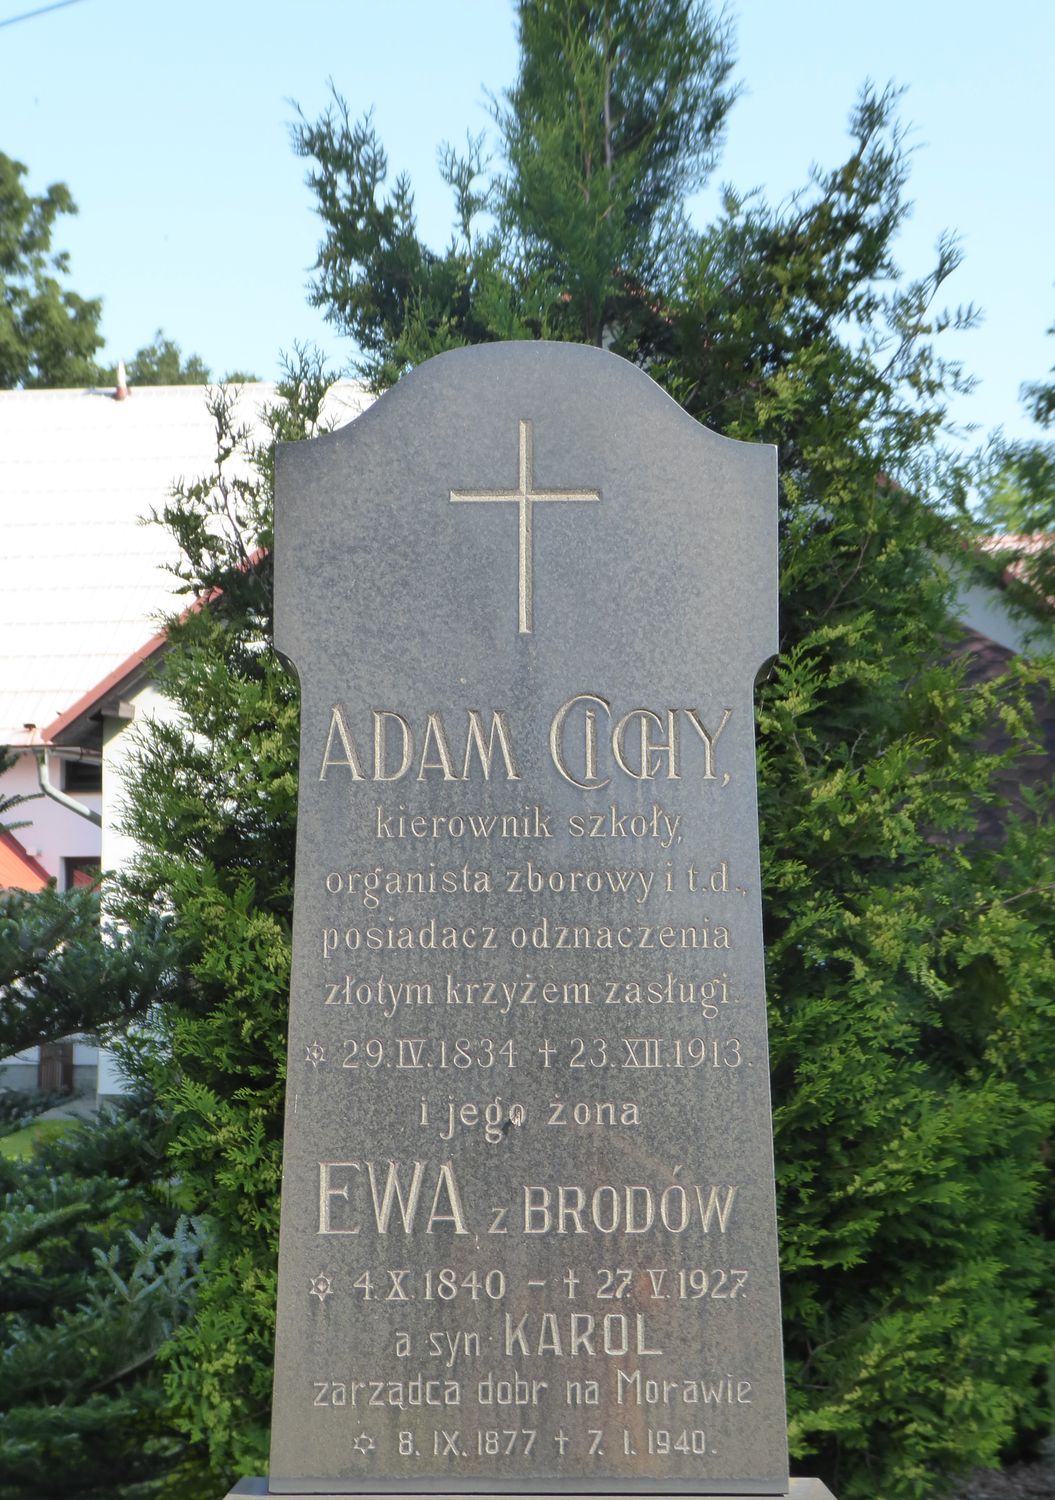 Fragment of the tomb of Adam Cichy, Ewa Cichy, Karol Cichy and Ewa Jurczkowa from the cemetery of the Czech part of Těšín Silesia, as of 2022.